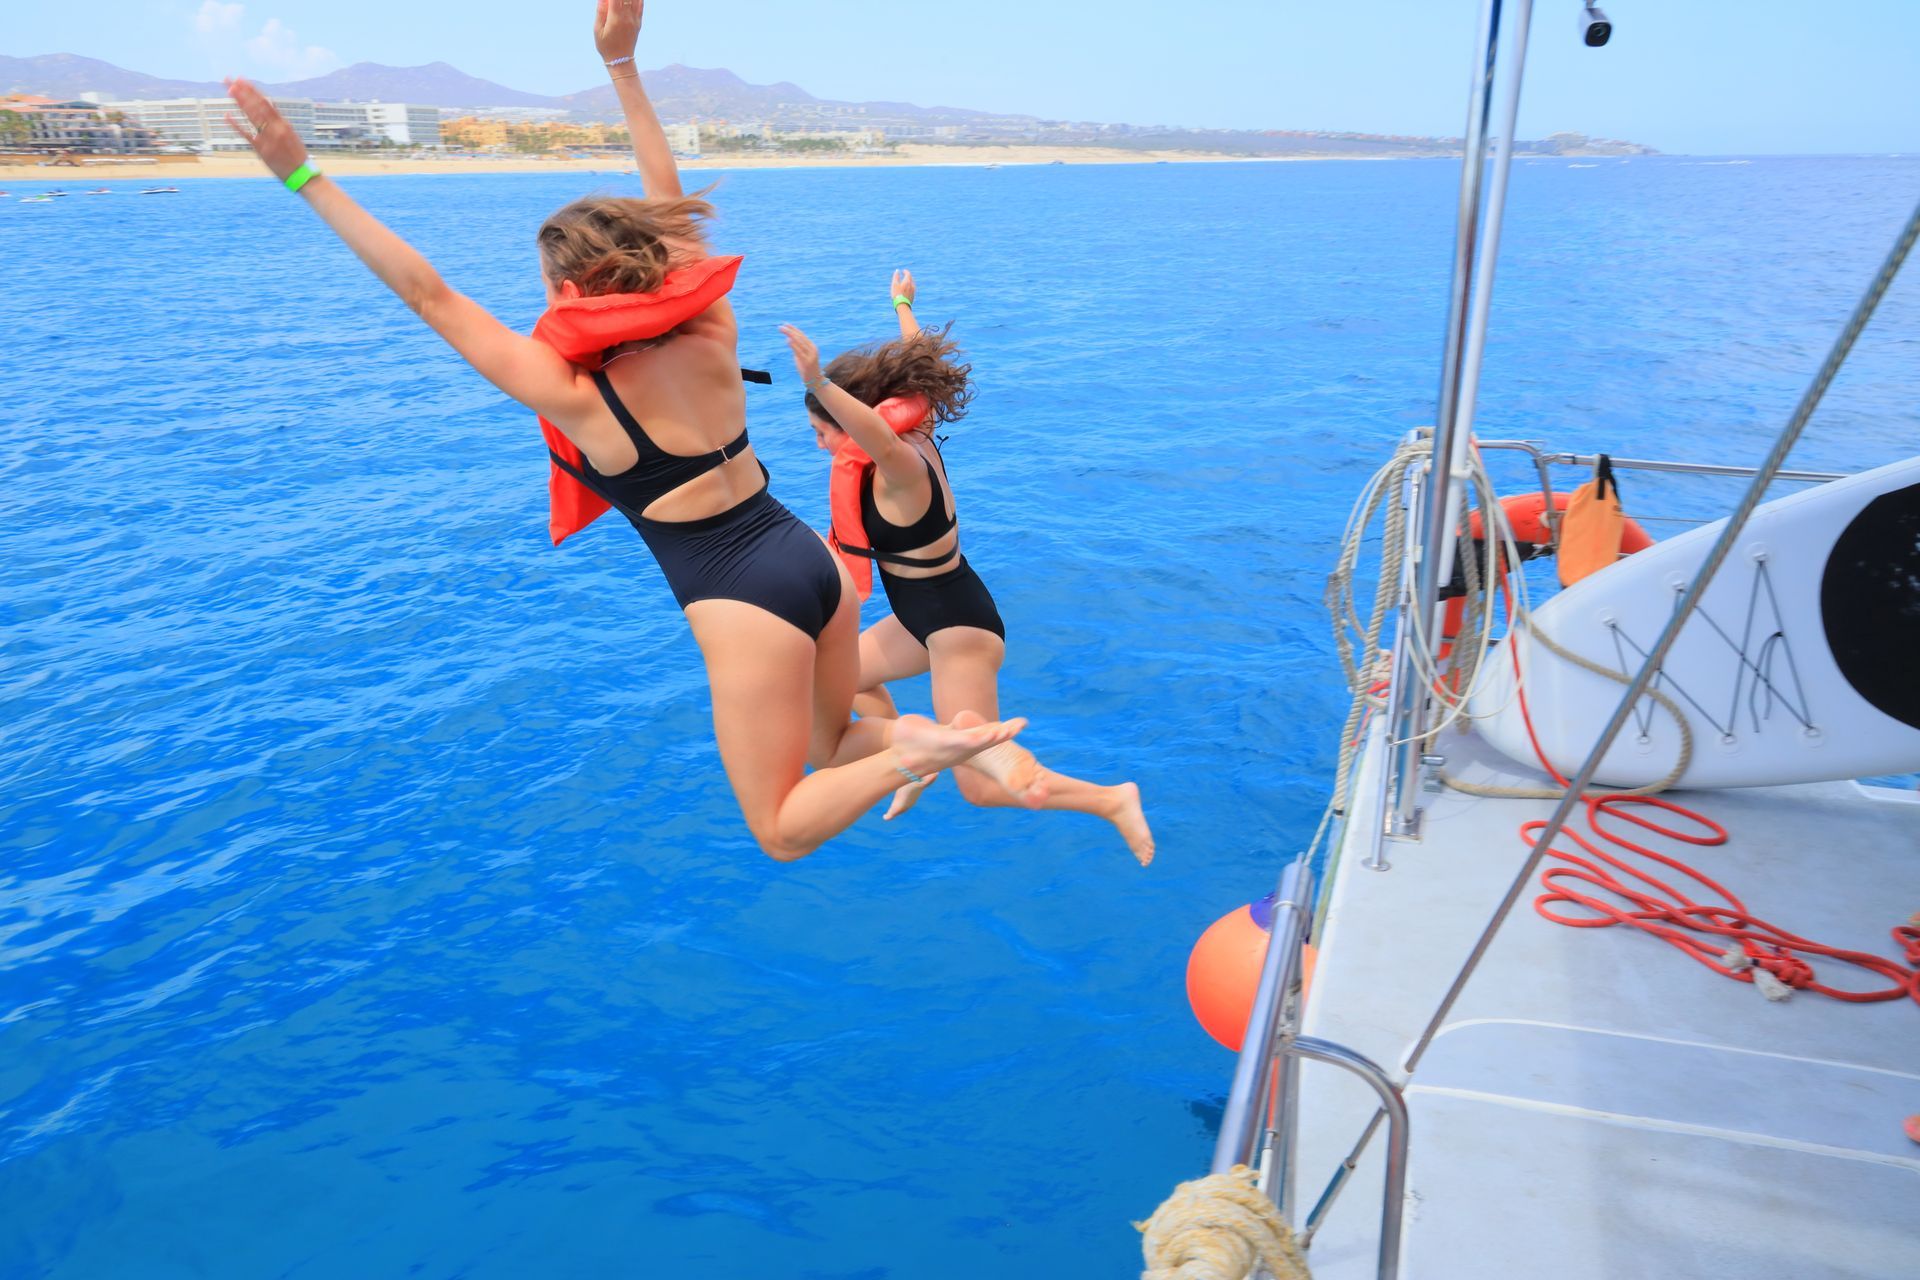 Two women are jumping off a boat into the ocean.